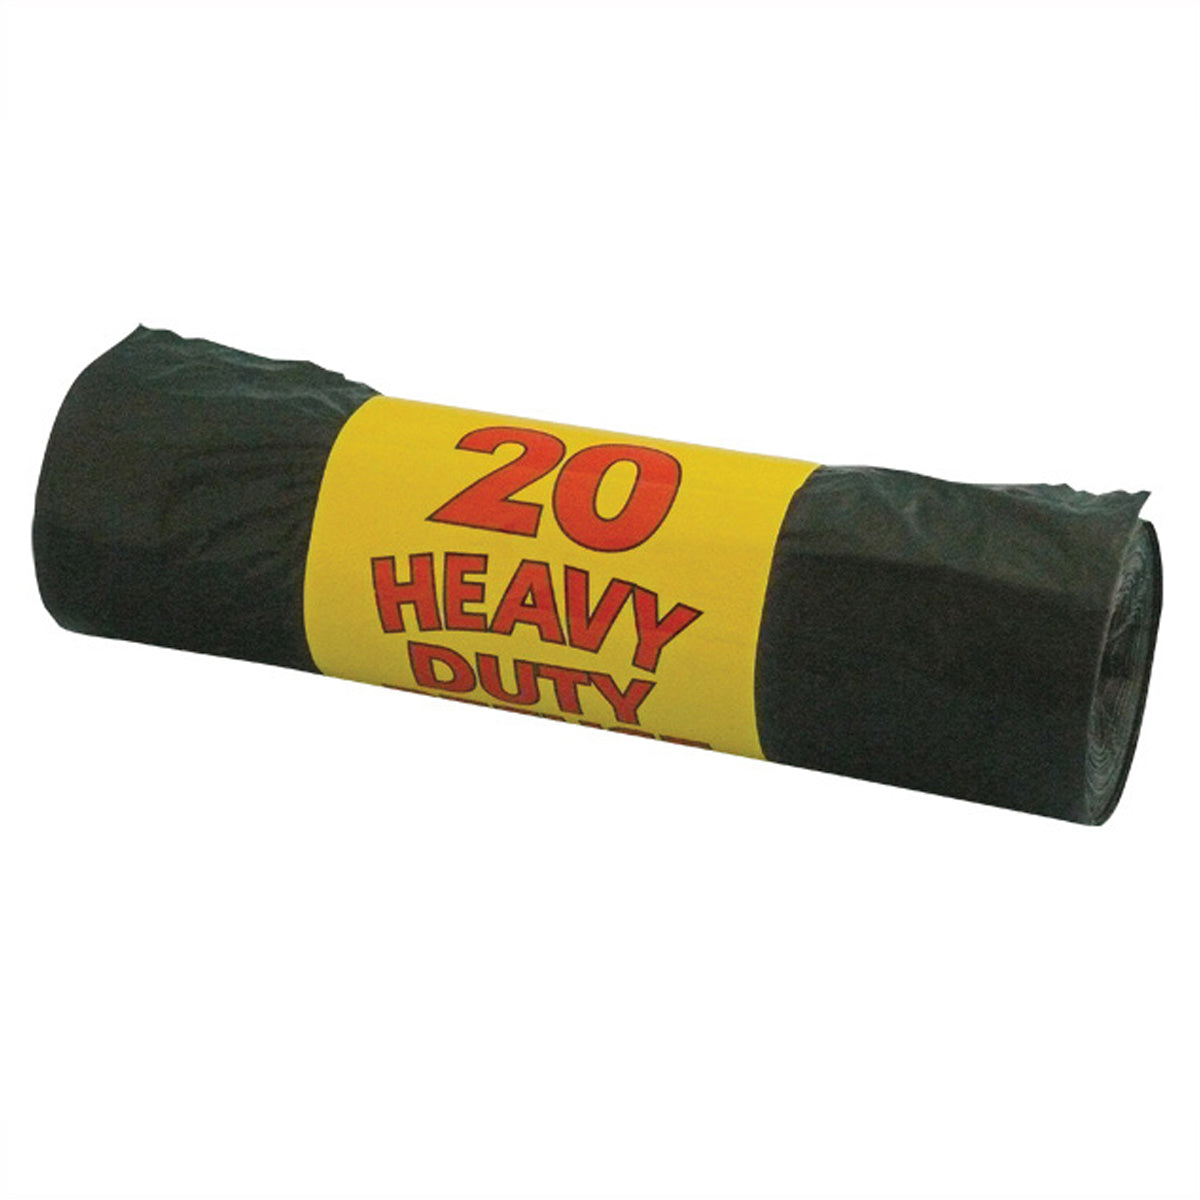 A roll of Royal Markets - Heavy Duty Refuse Sacks (Bin Liners) - 20 Pack with the words 20 heavy duty on it.